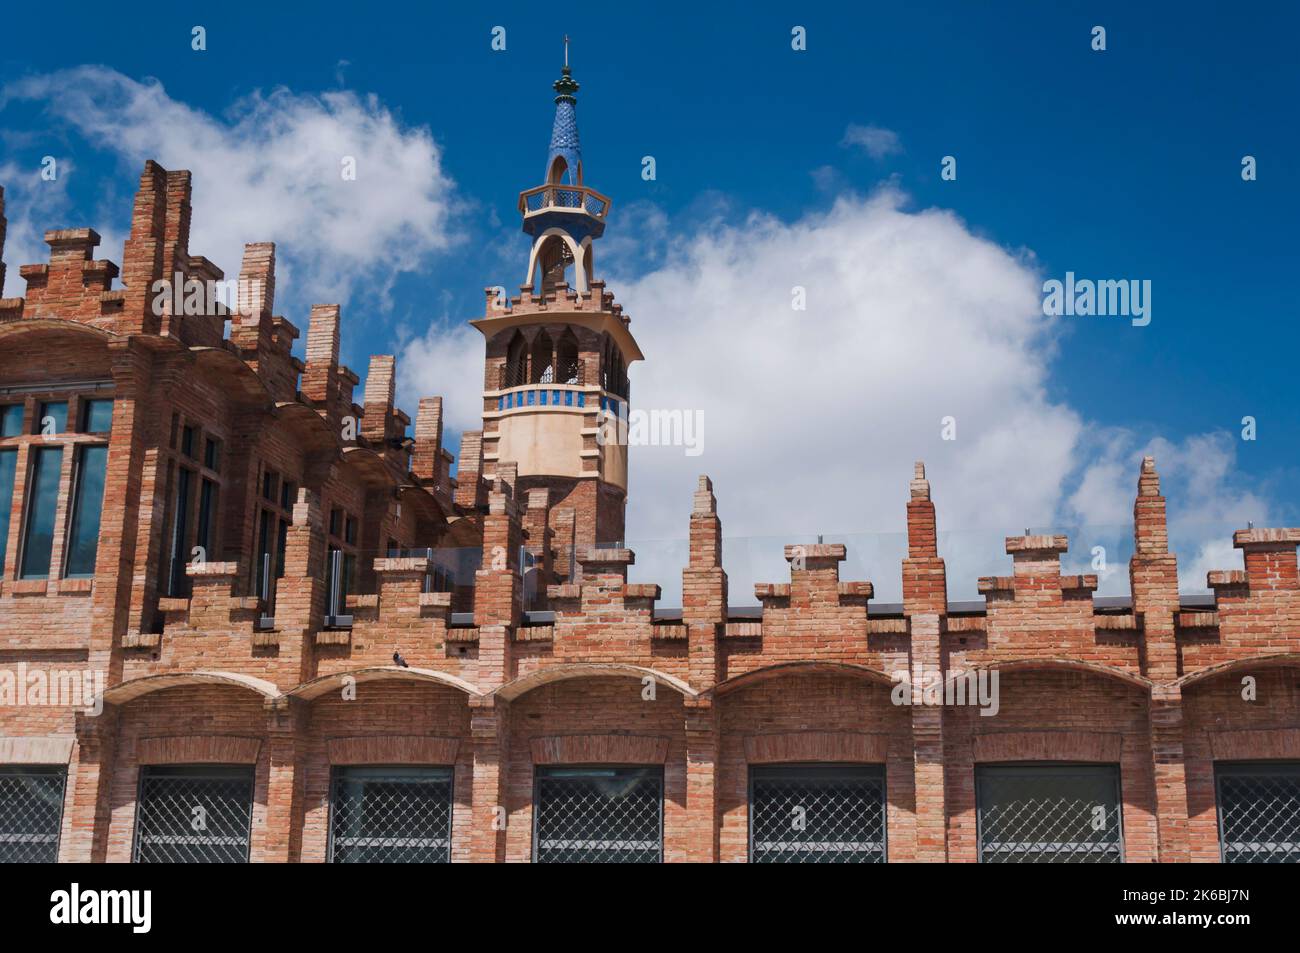 Caixaforum Barcelona in the ancient Casaramona textile factory designed by Puig i Cadafalch, Sants-Montjuic district, Catalonia, Spain. Stock Photo